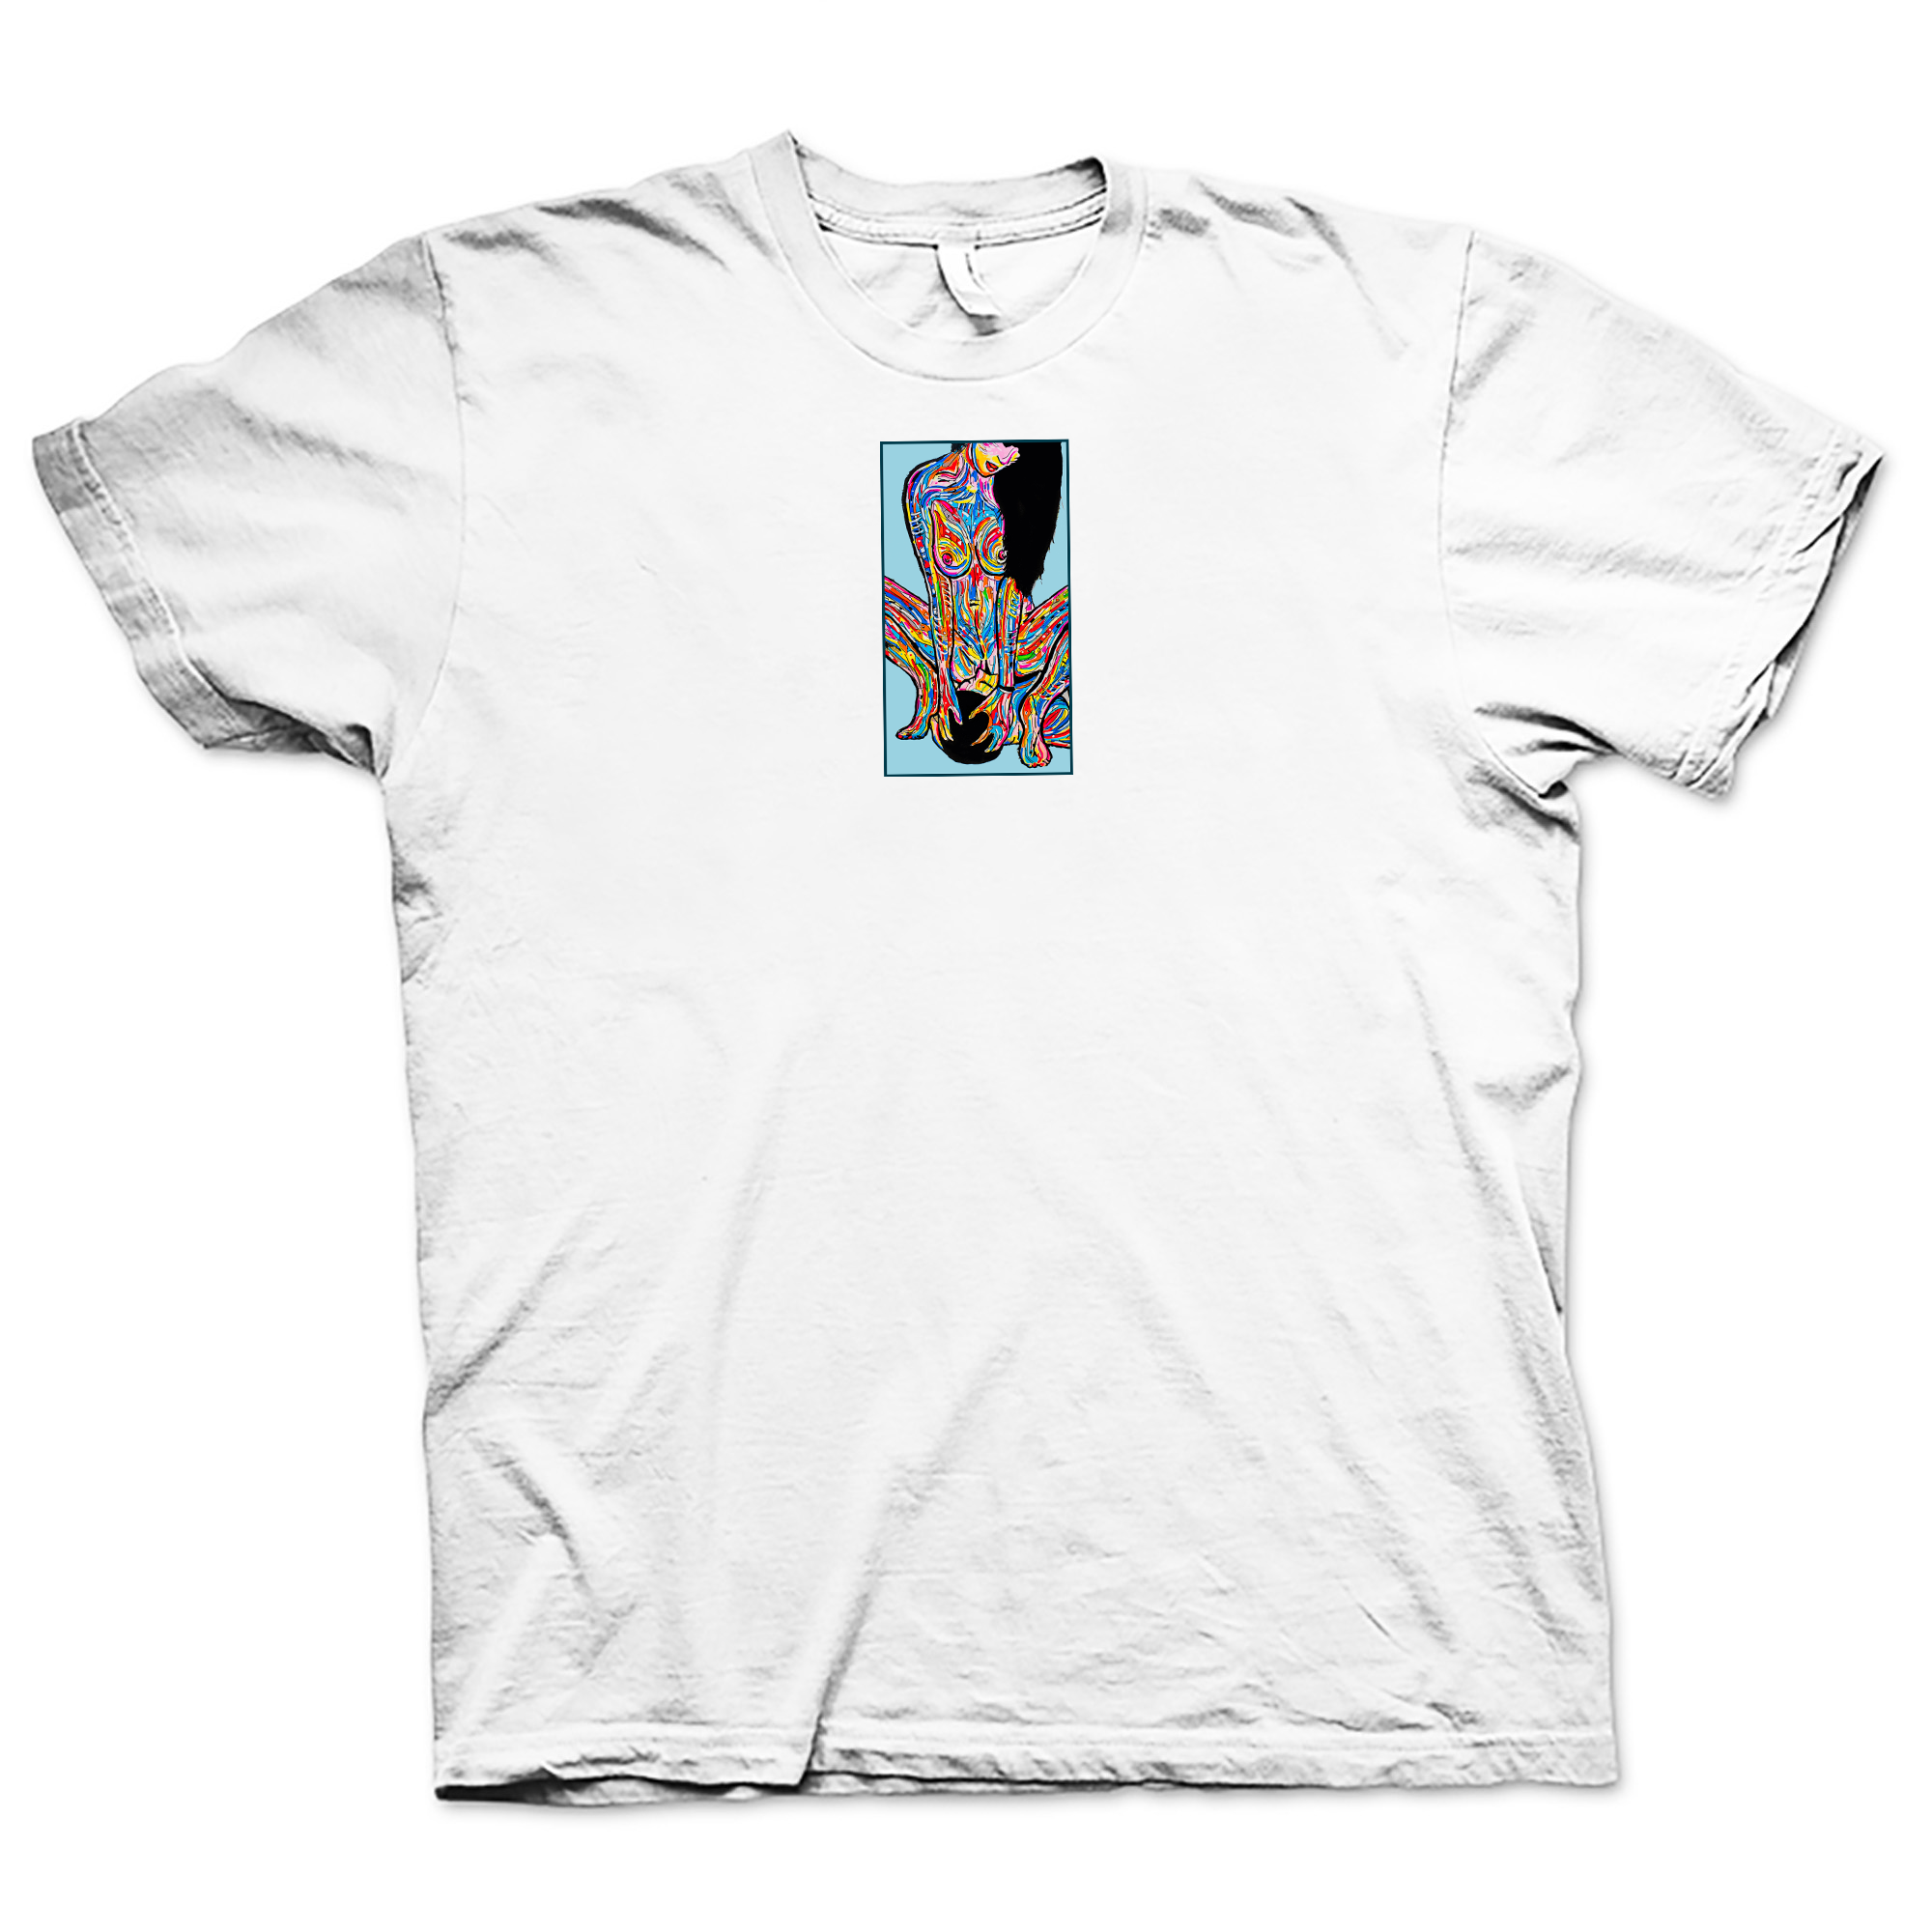 Gemello Store Official UNTITLED TSHIRT